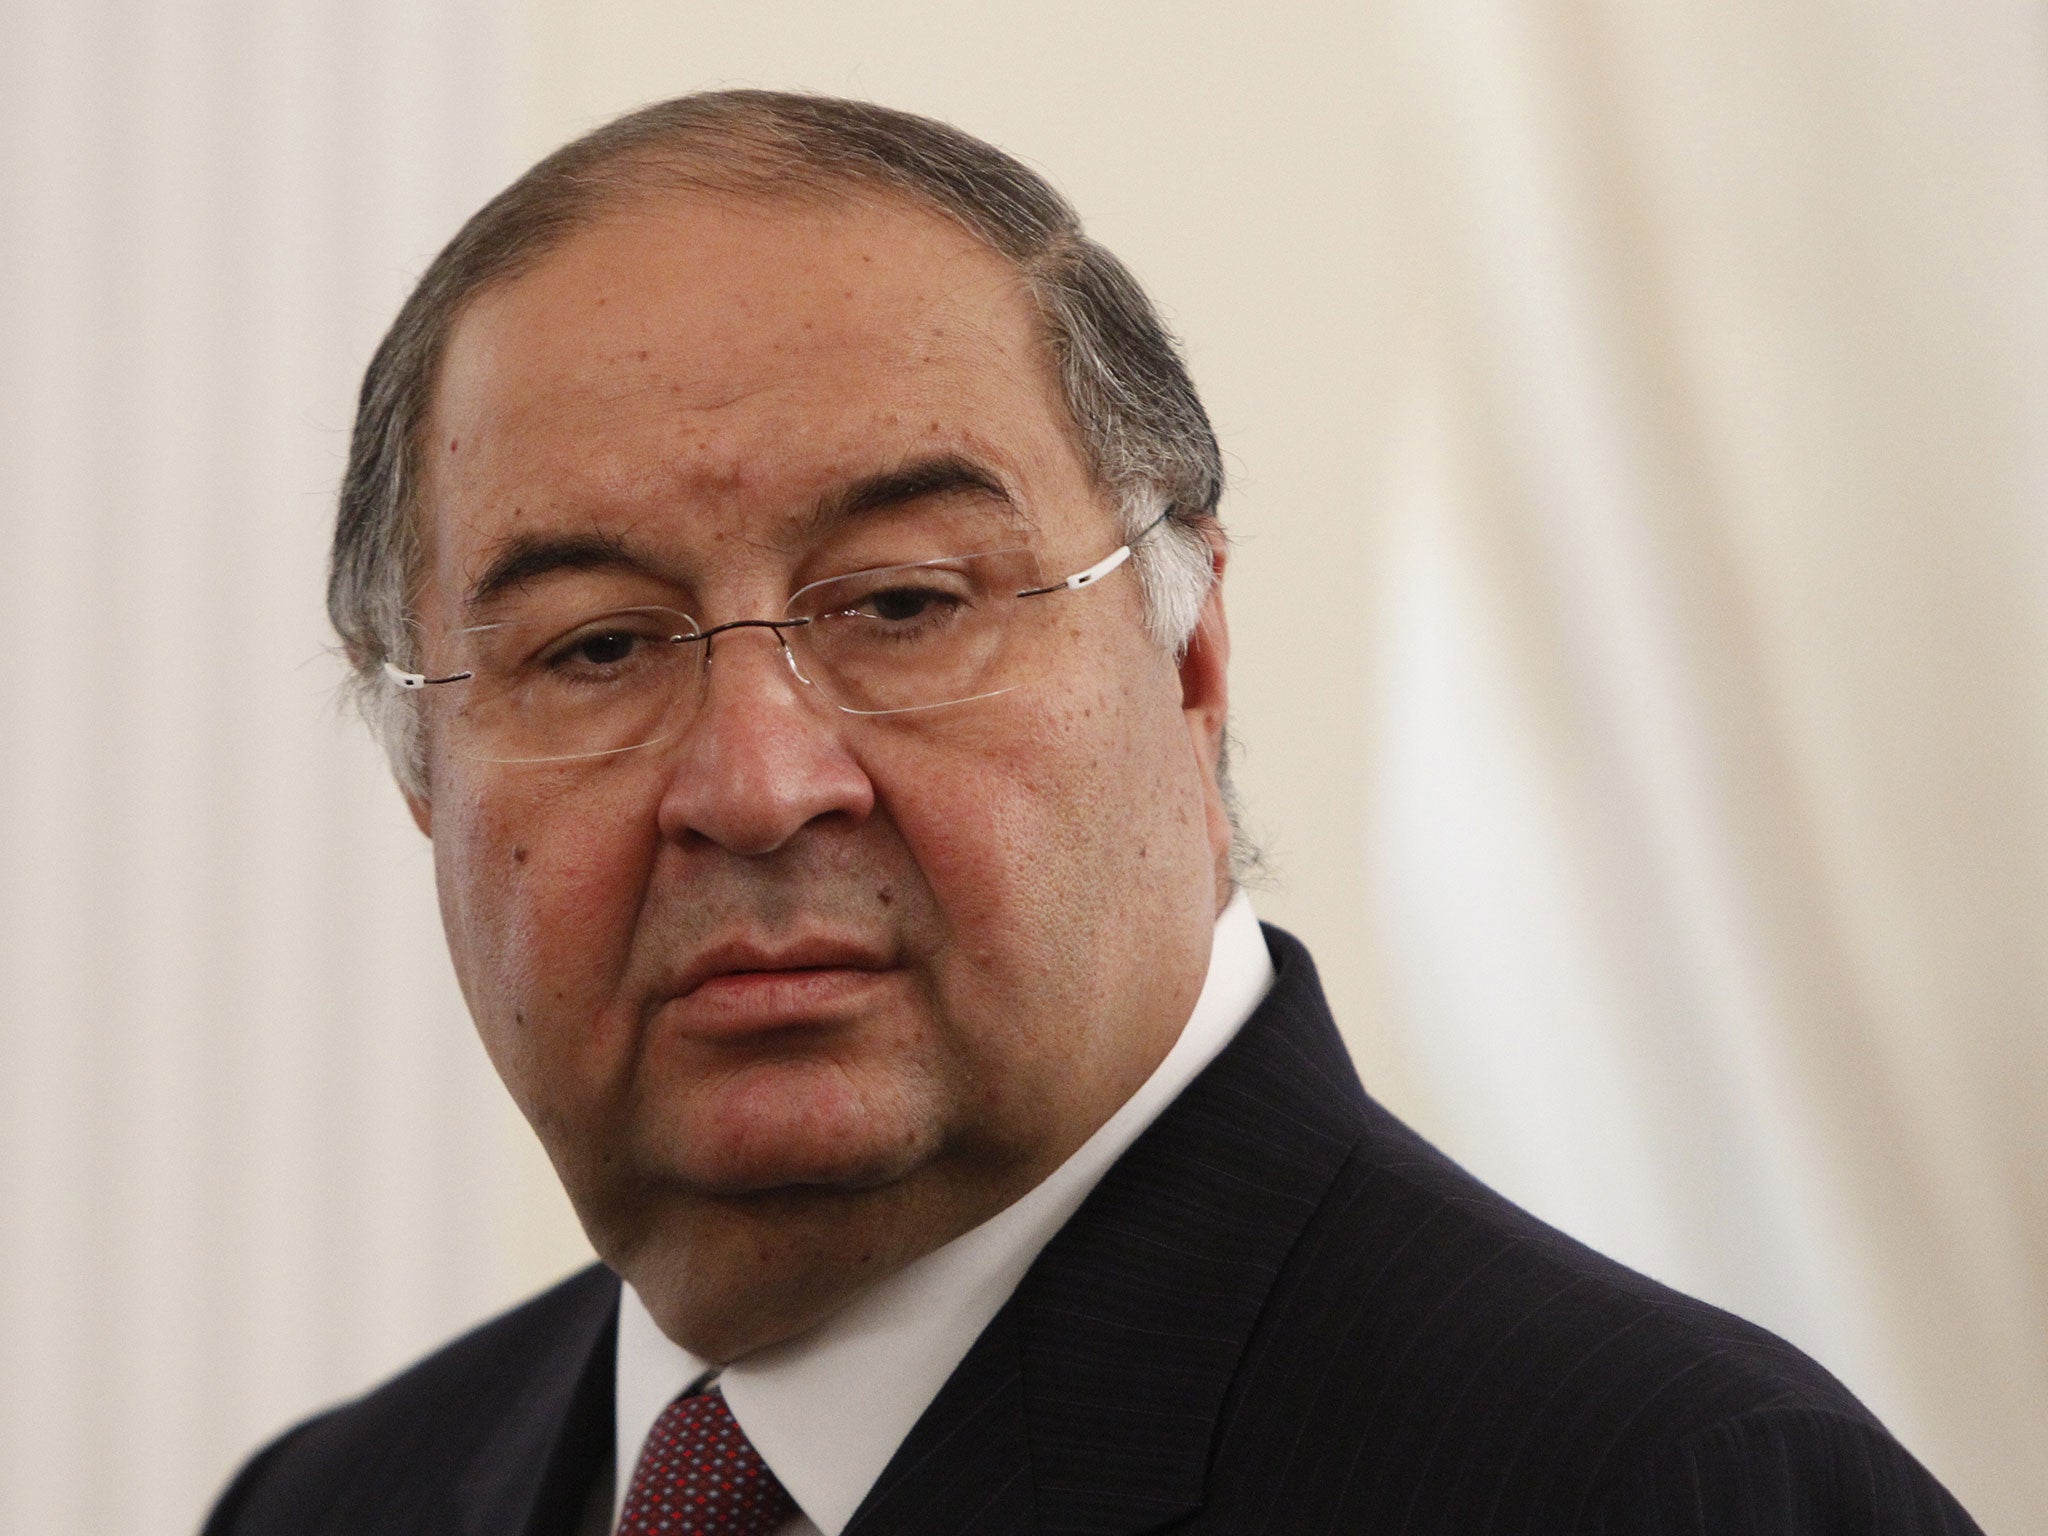 Alisher Usmanov has made a £1bn offer to take control of Arsenal